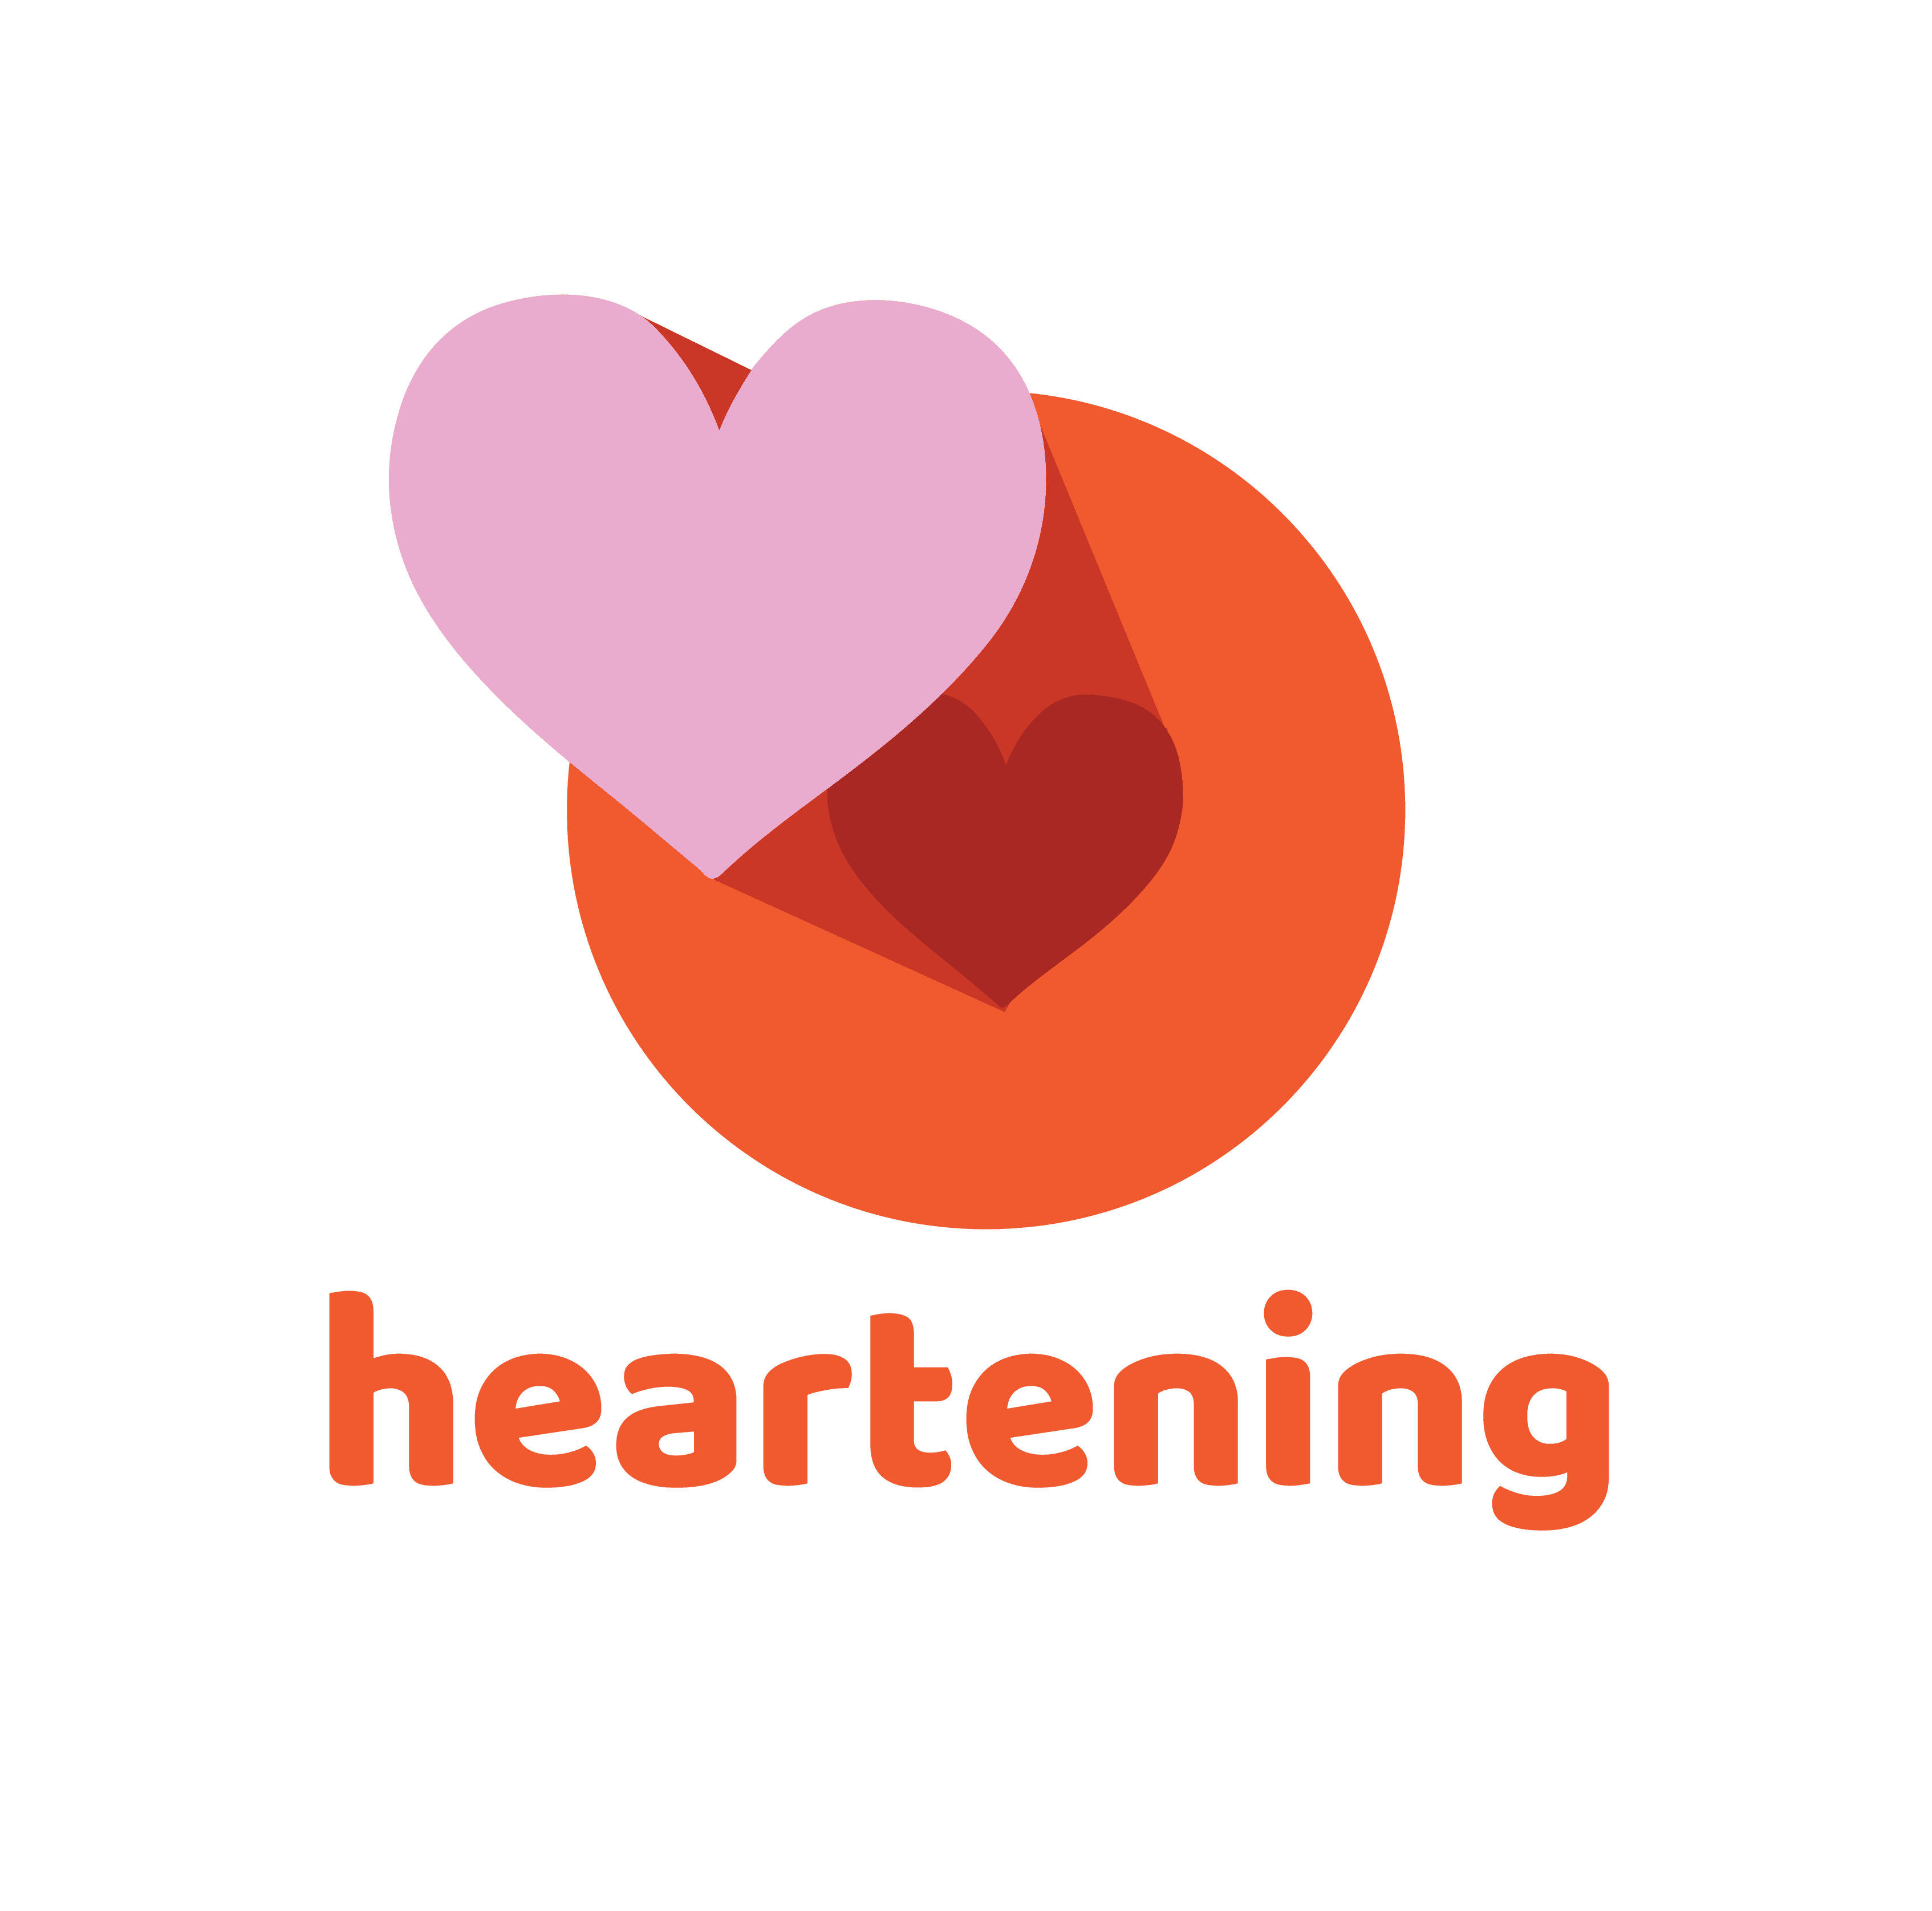 heartening Austin logo which is a pink heart coming out of a red circle that has a heart shape shadow in the center with the word heartening below